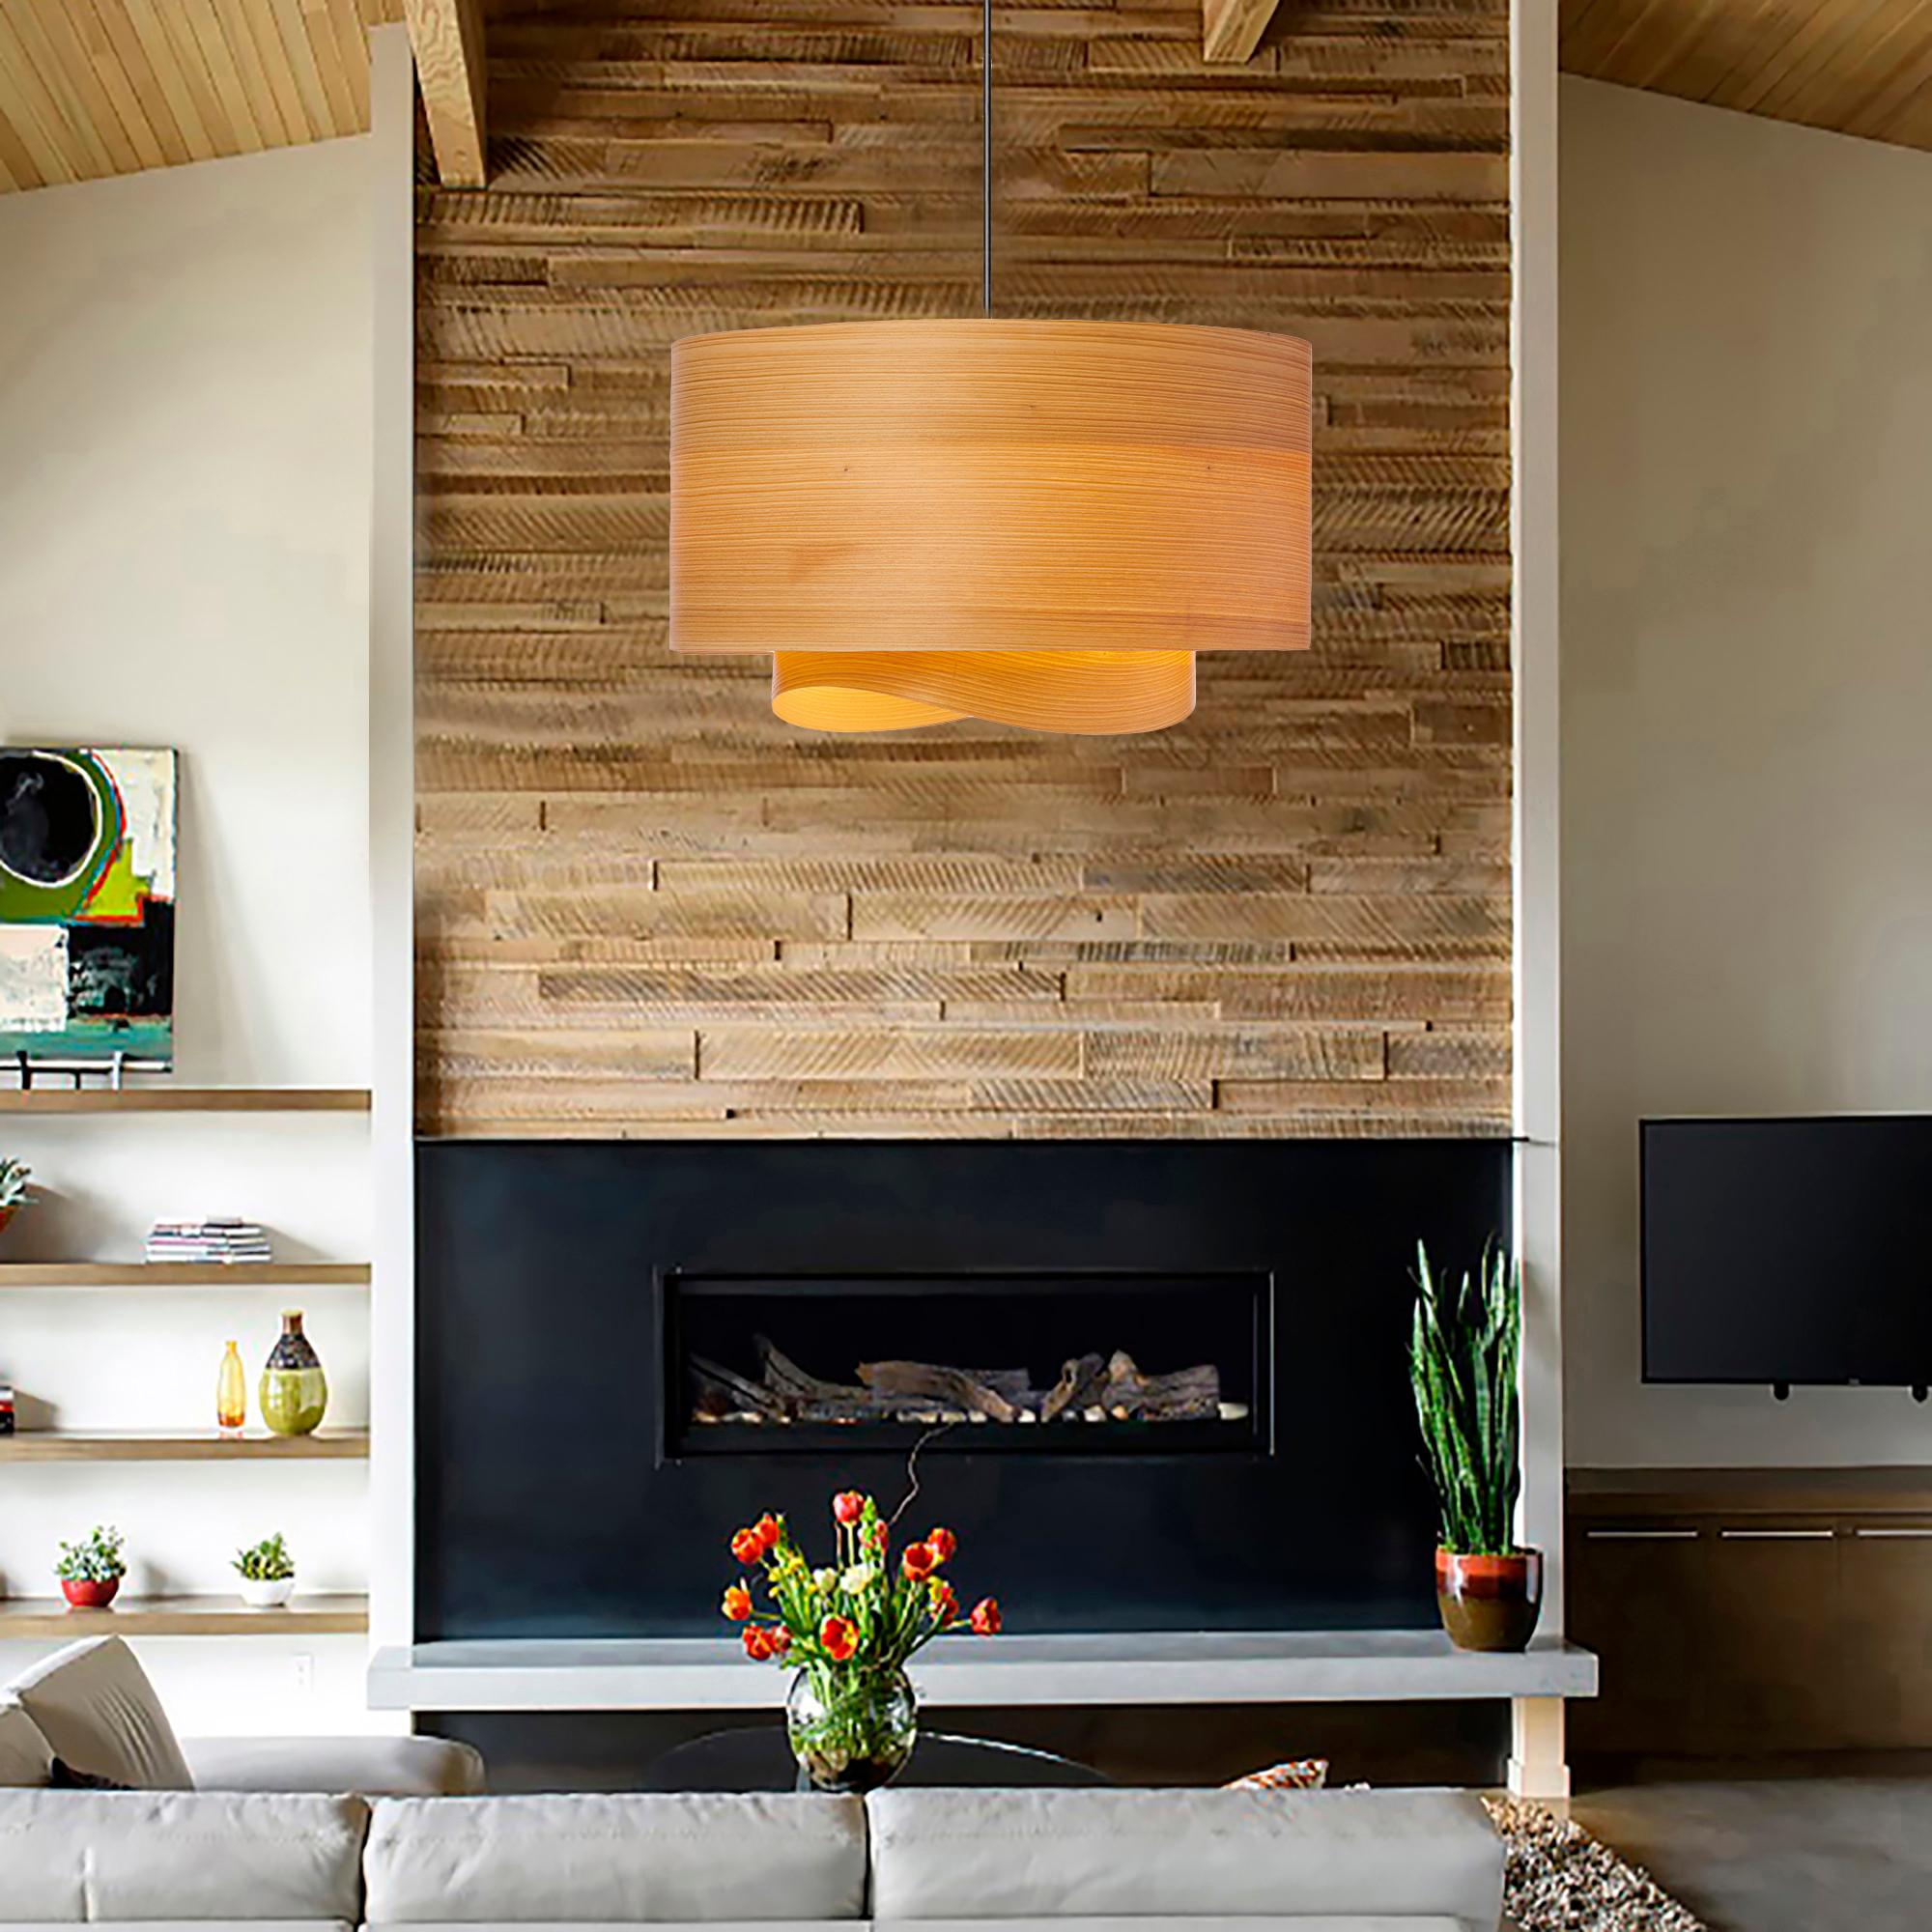 The Half BOWEN pendant light is a stunning, contemporary Mid-Century Modern light fixture with a Scandinavian composition and cypress wood veneer construction. Inspired by Danish modern design, the Half BOWEN pendant light's minimalist silhouette